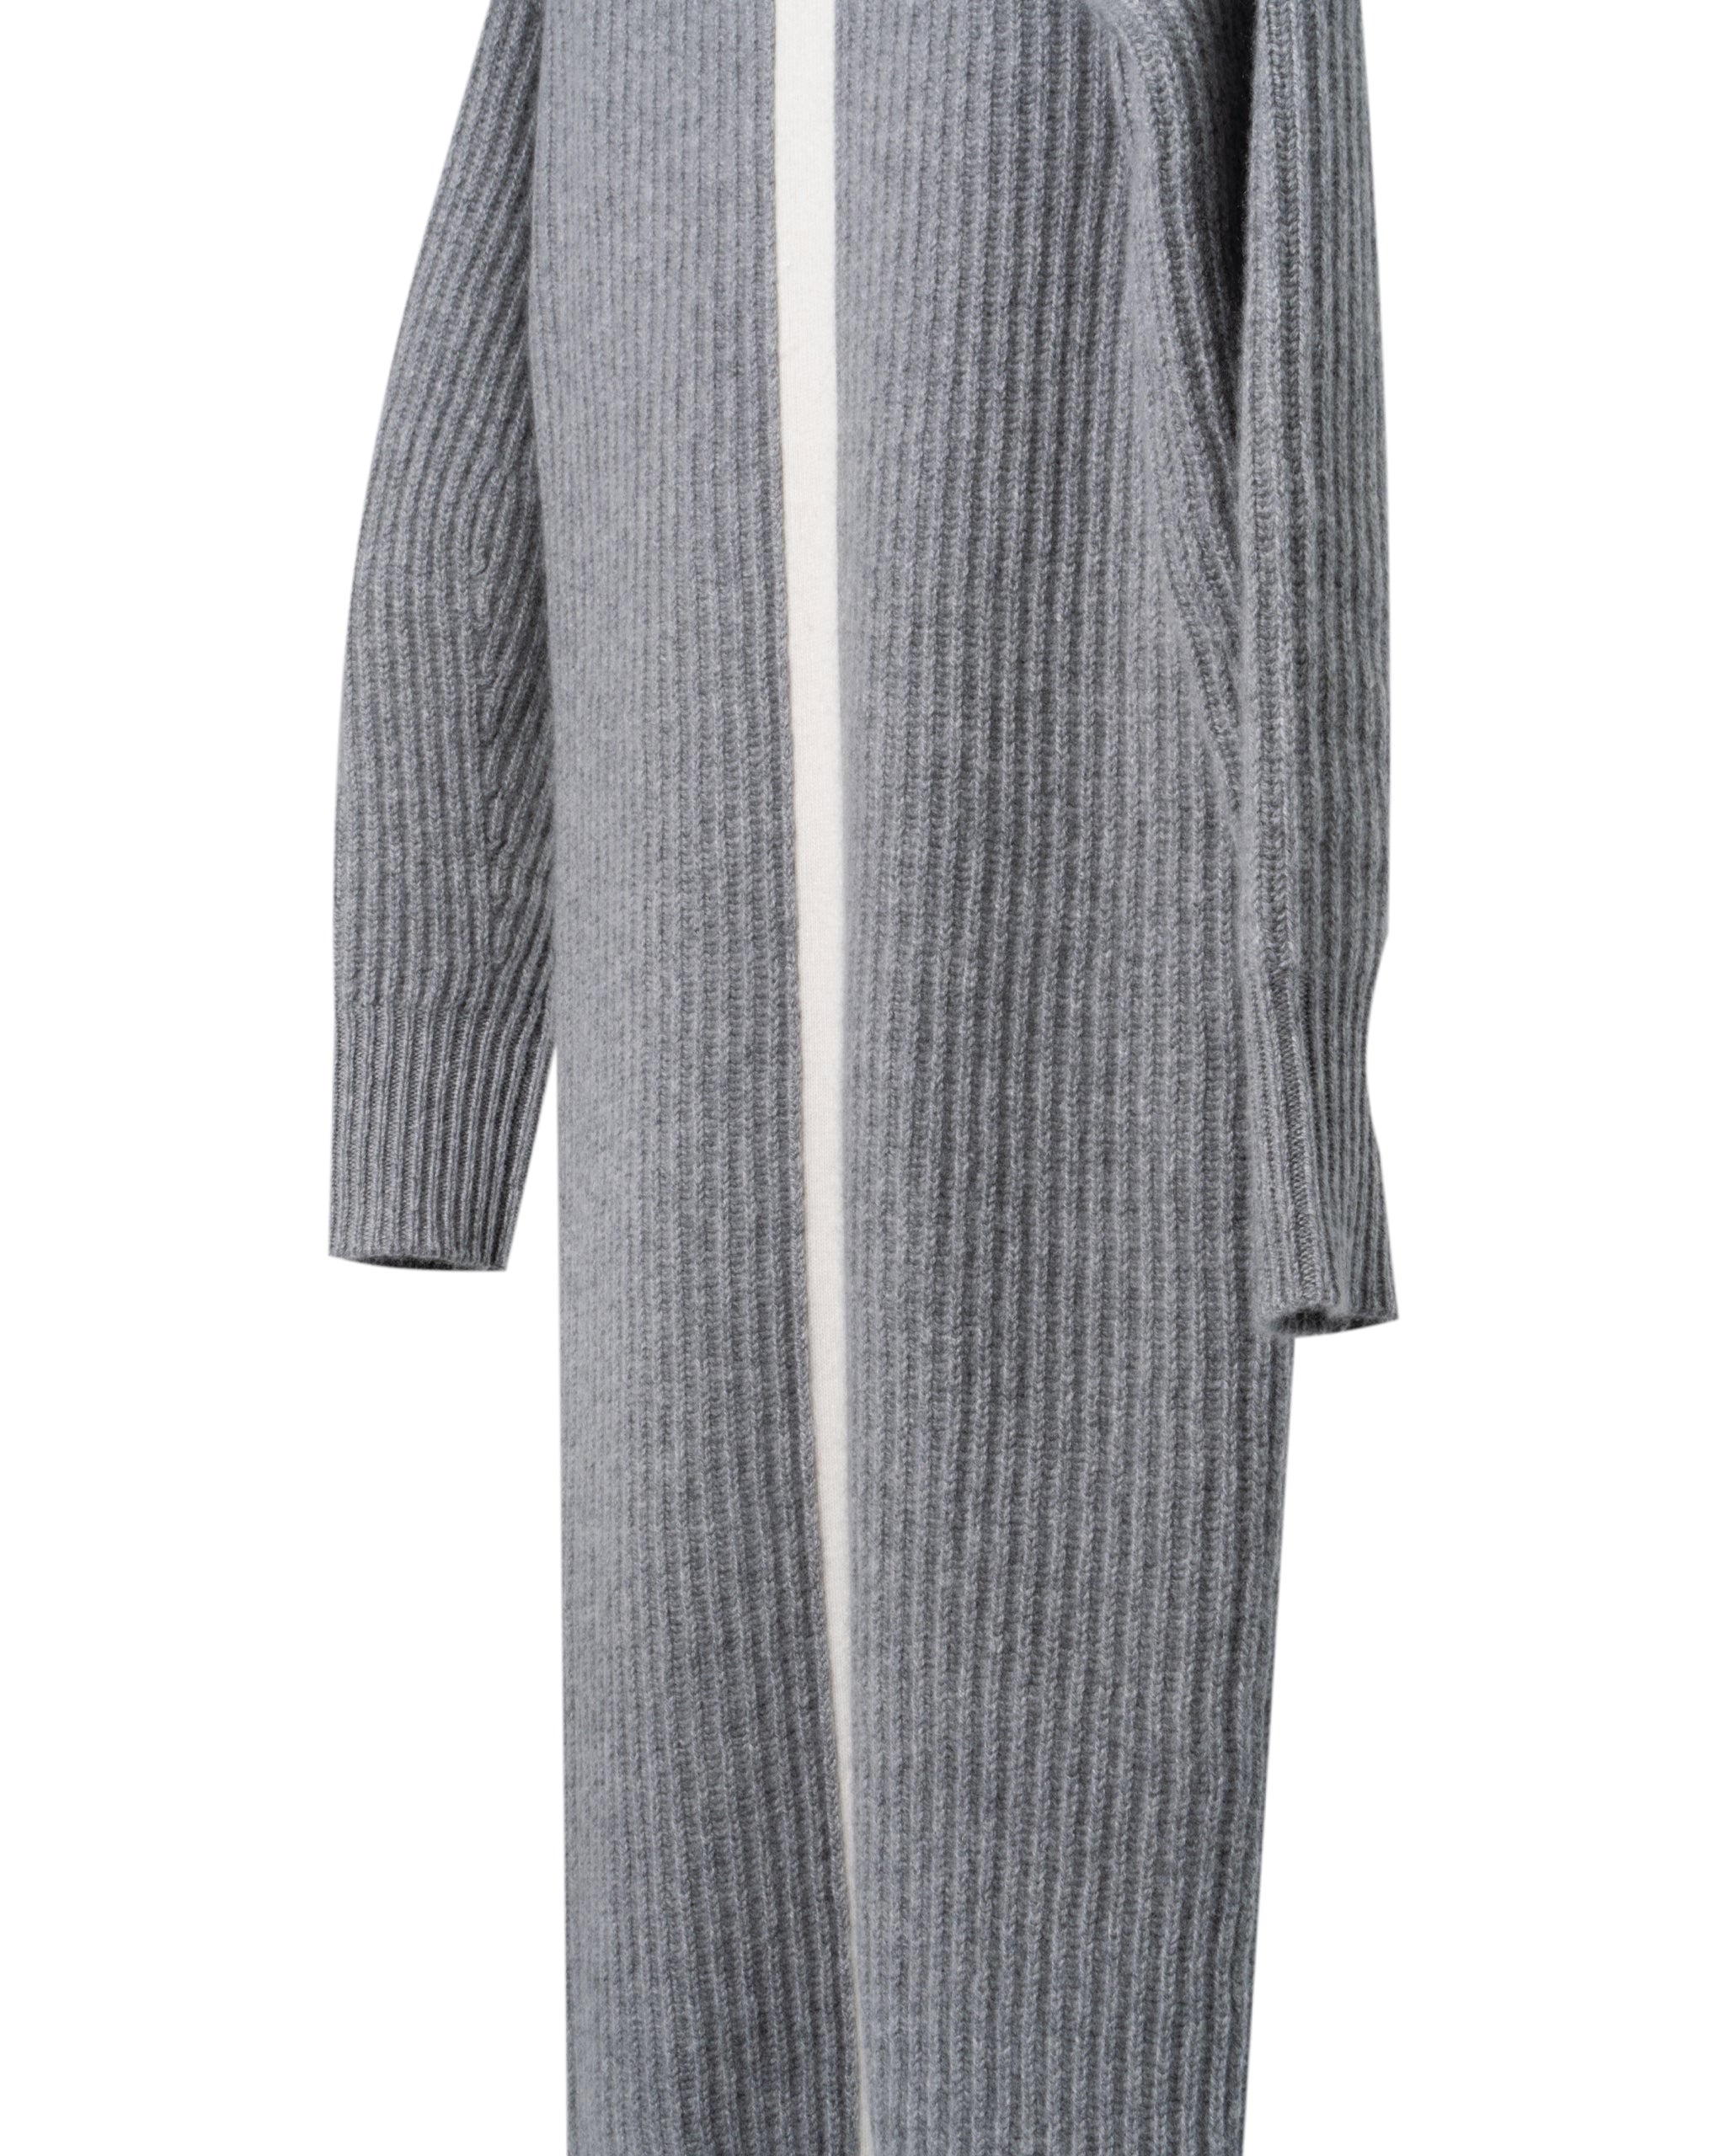 CASHMERE ROLLNECK LONG DRESS WITH BACK PIPING